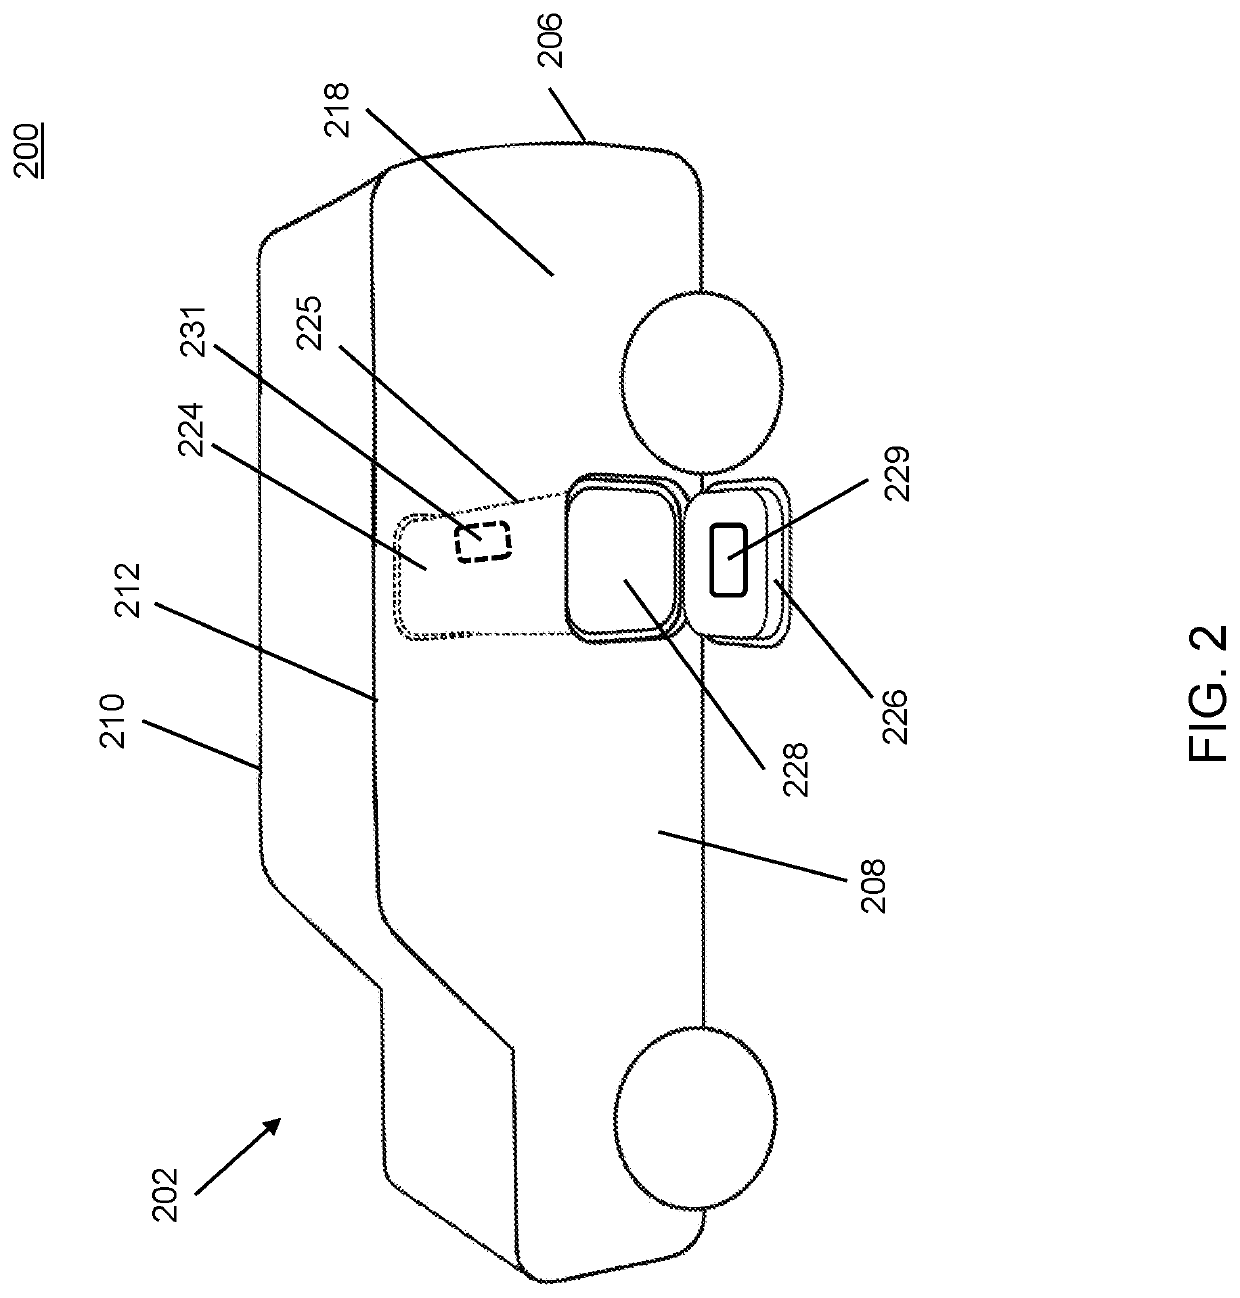 Automotive Vehicle Through Body Storage with Combination Door and Step